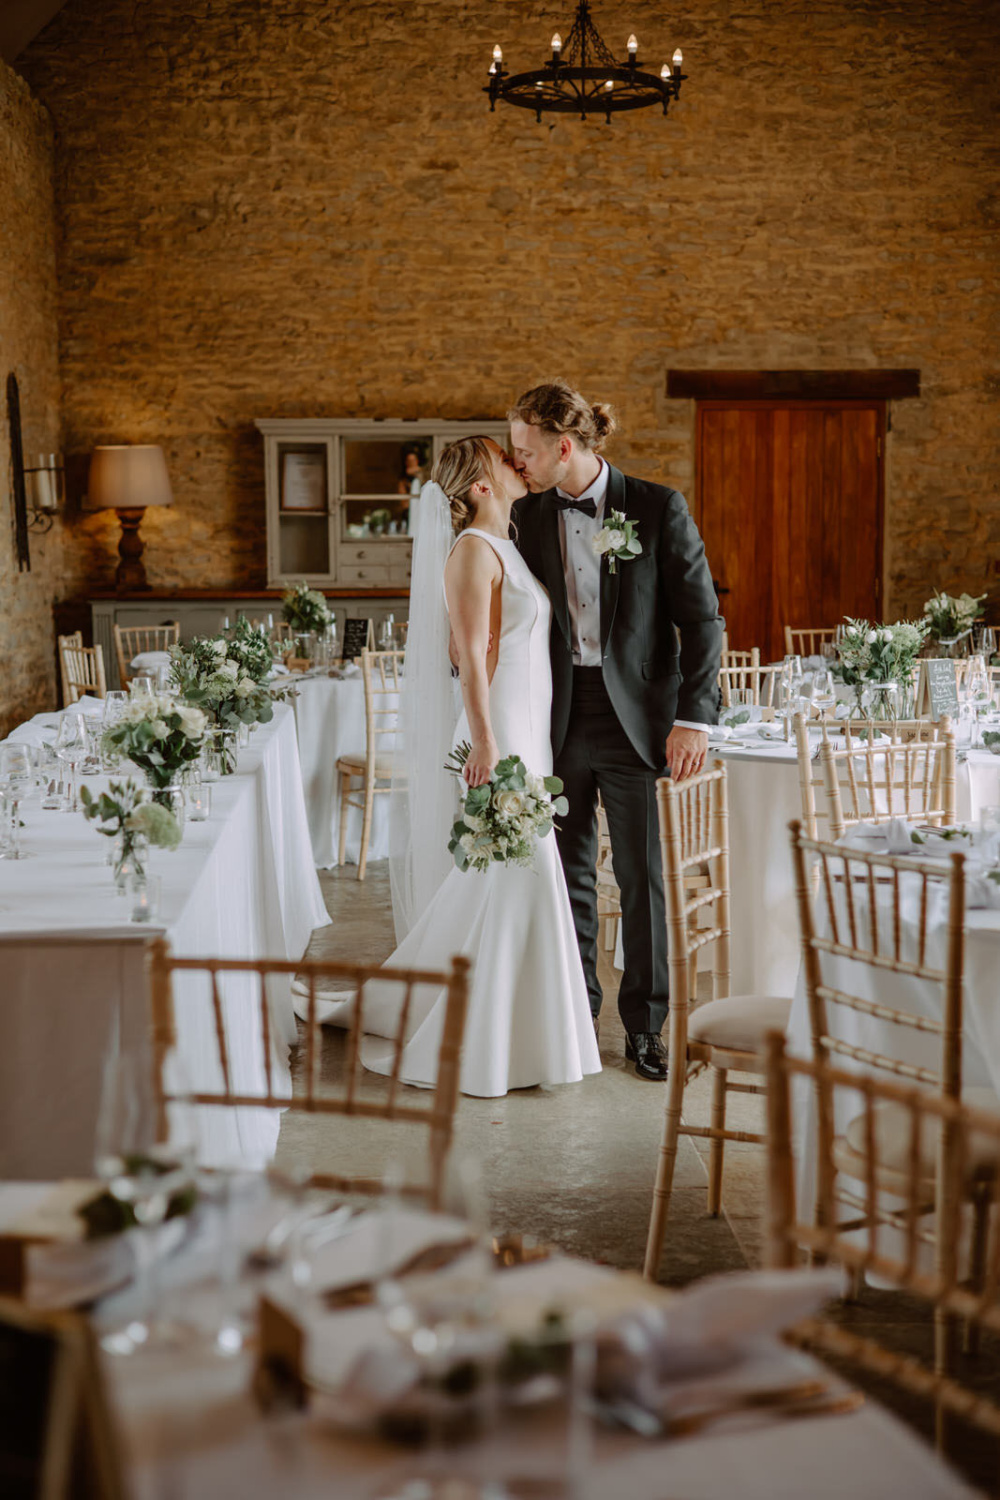 A bride and groom kissing at their wedding reception Stratton Court Barn.